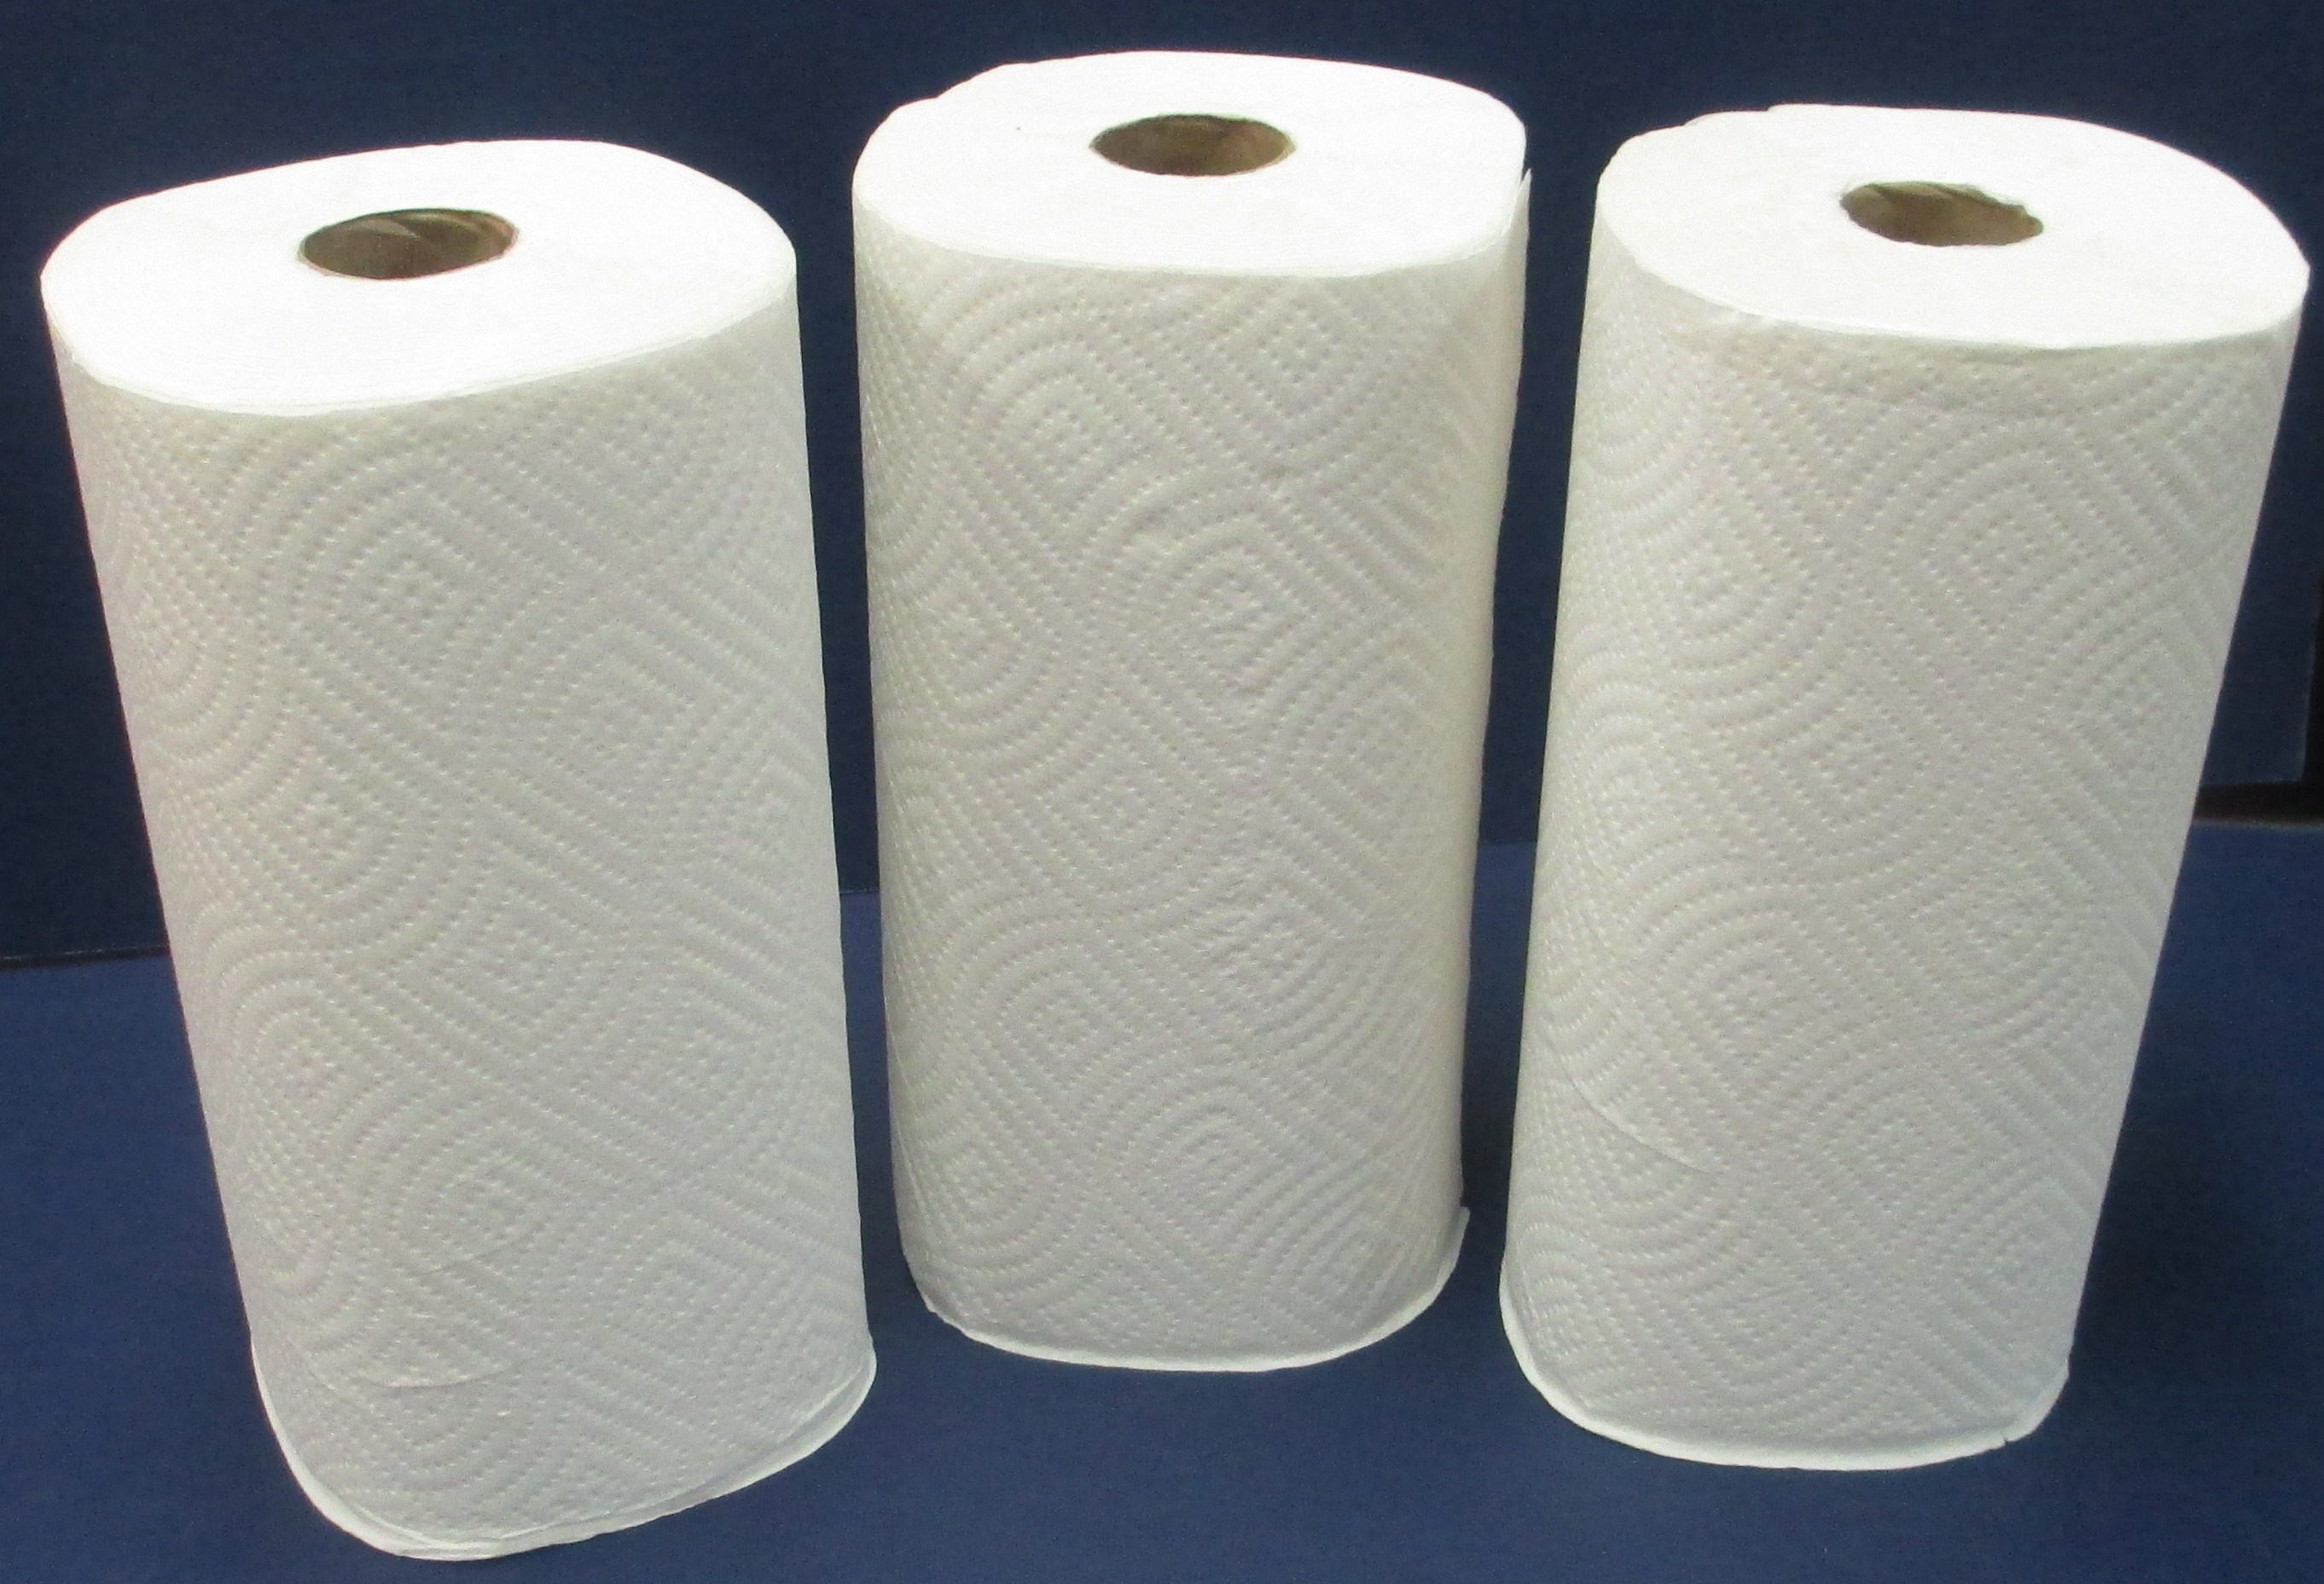 paper kitchen towels kuki collection household absorbent cleaning needs perfect quality high